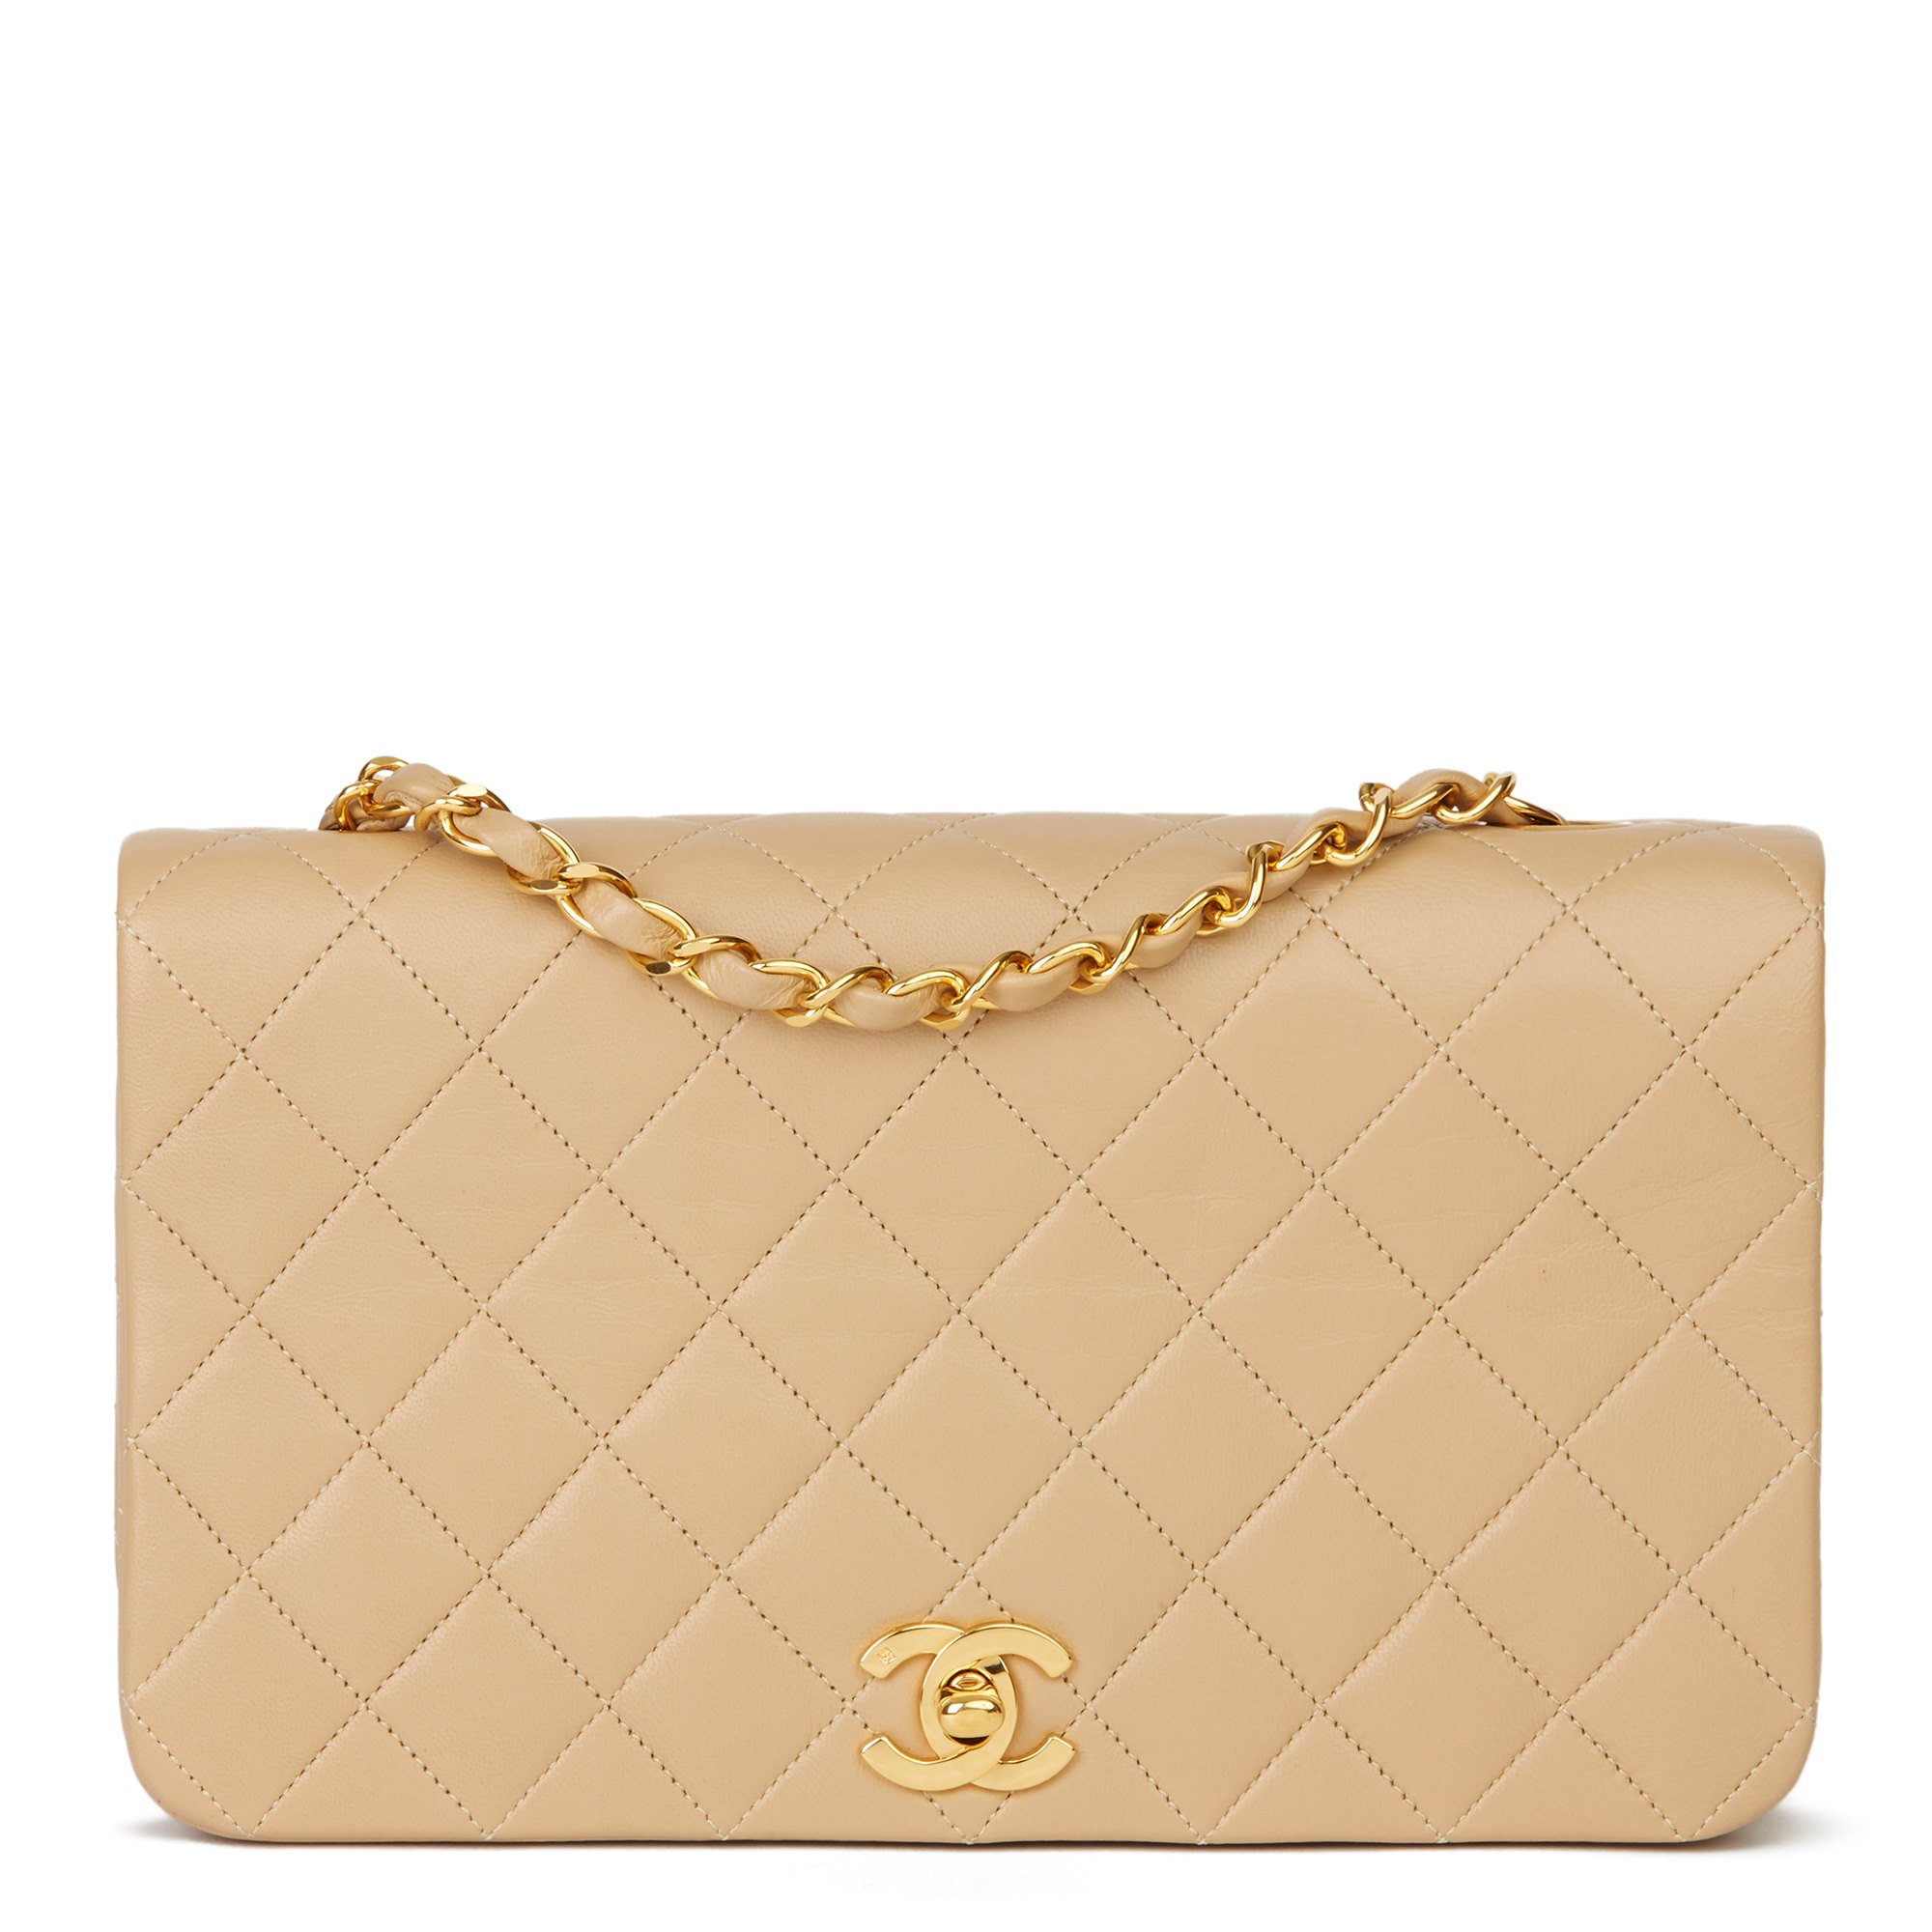 Chanel Small Classic Single Full Flap Bag 1991 HB3193 | Second Hand ...